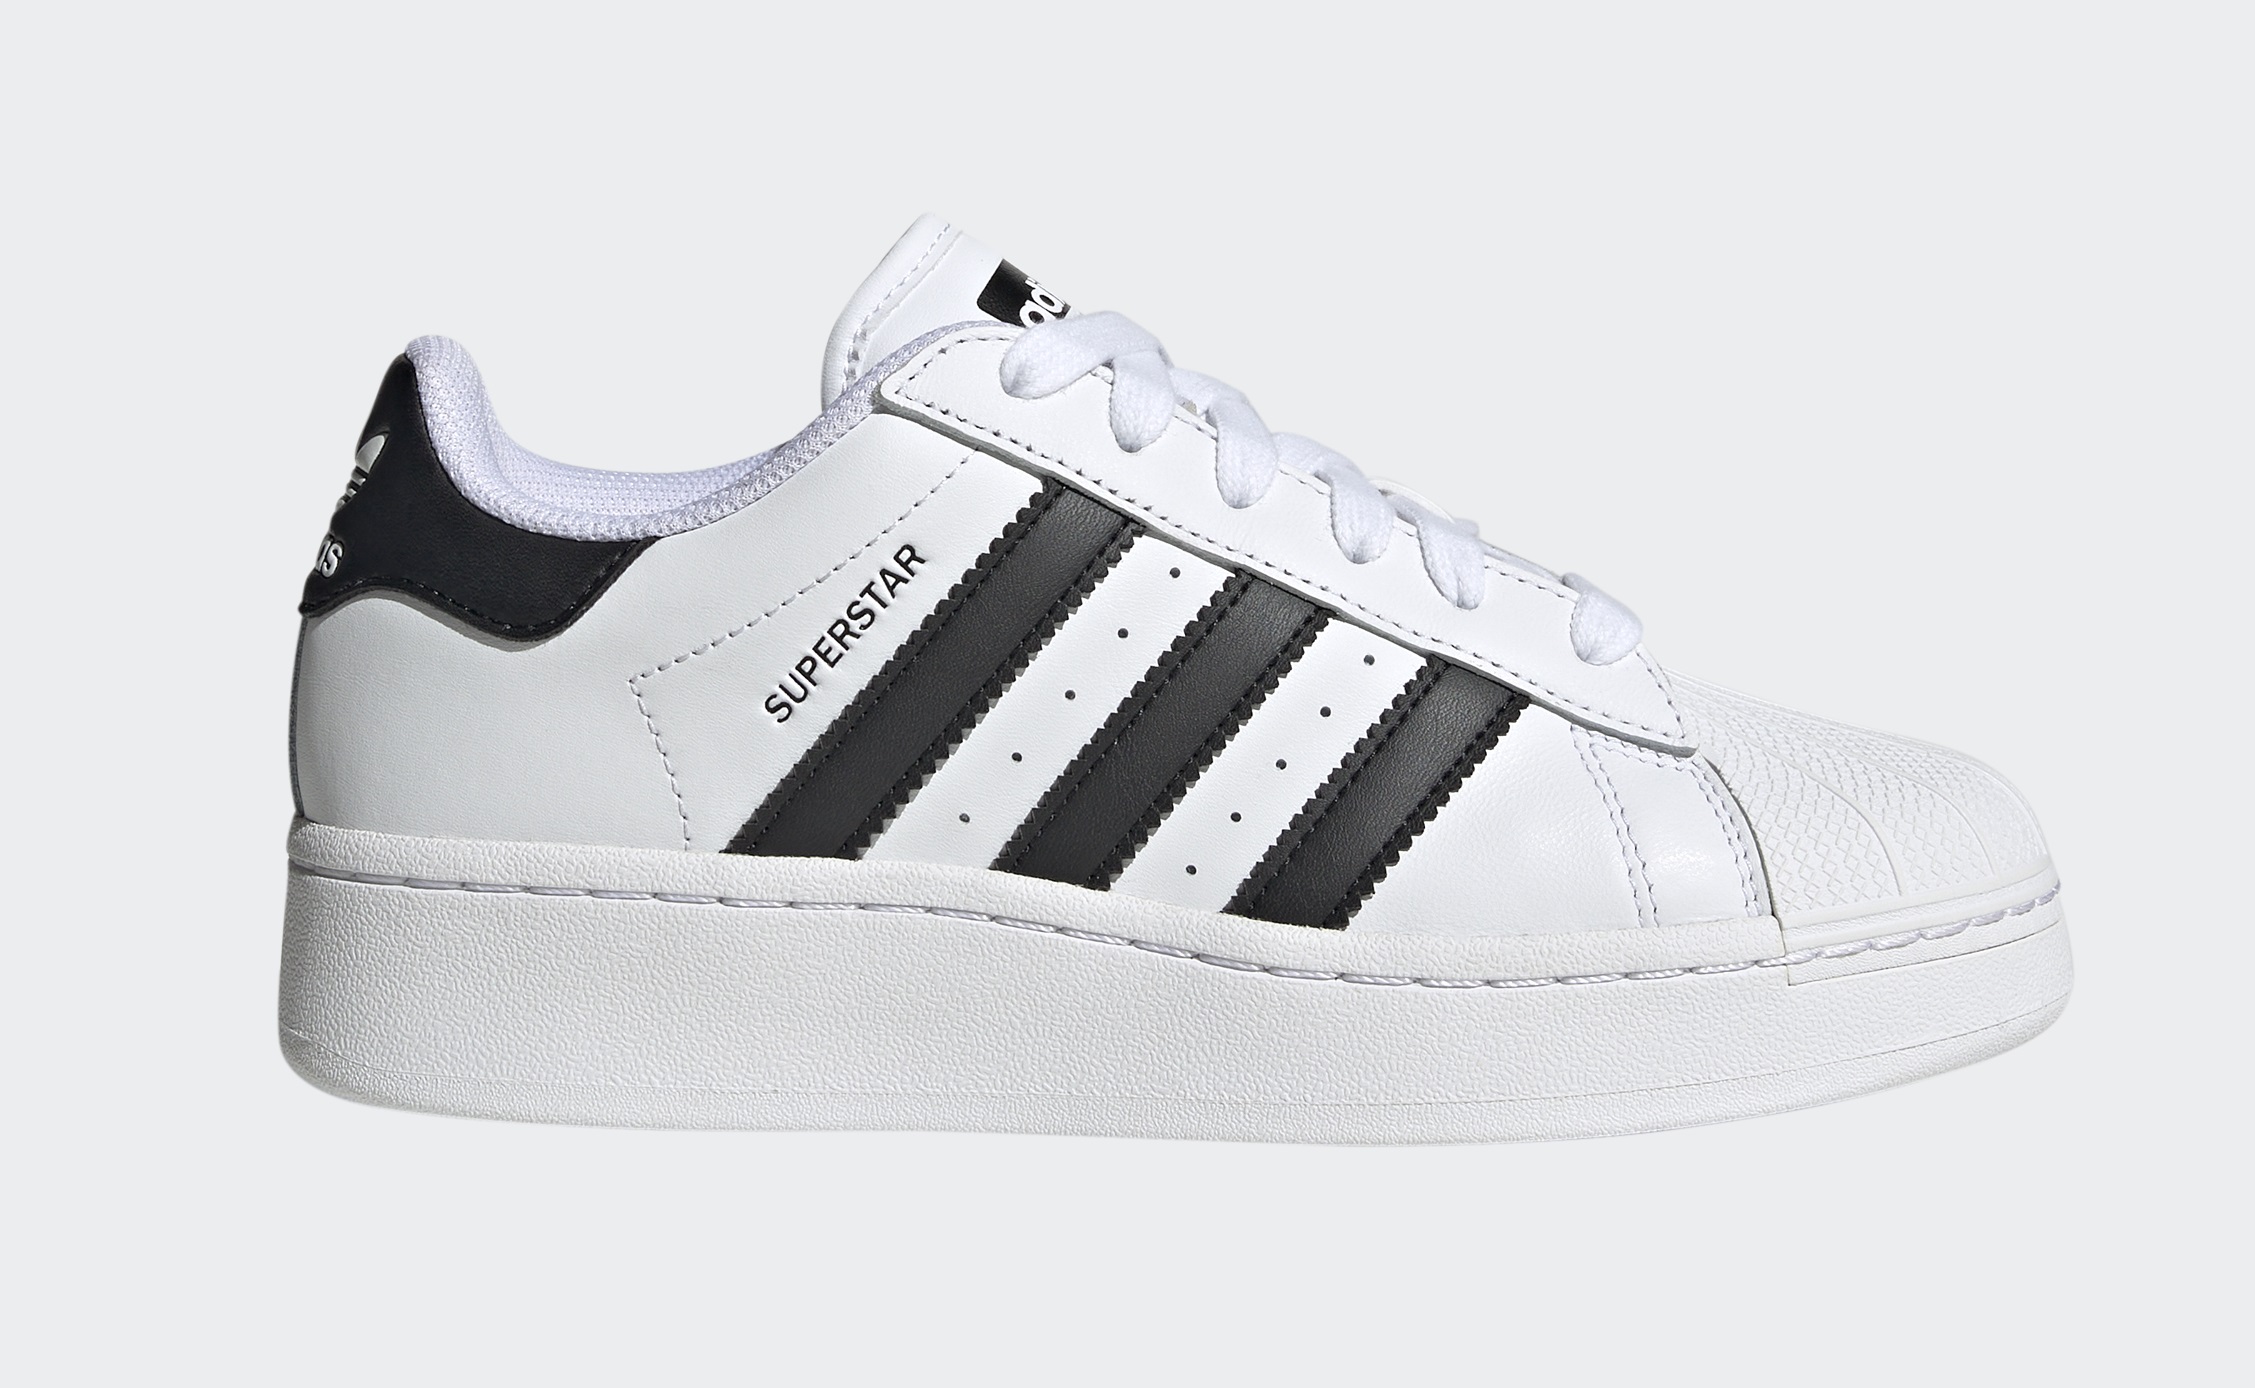 adidas Originals Remixes an Icon with the Launch of the Superstar XLG Silhouette